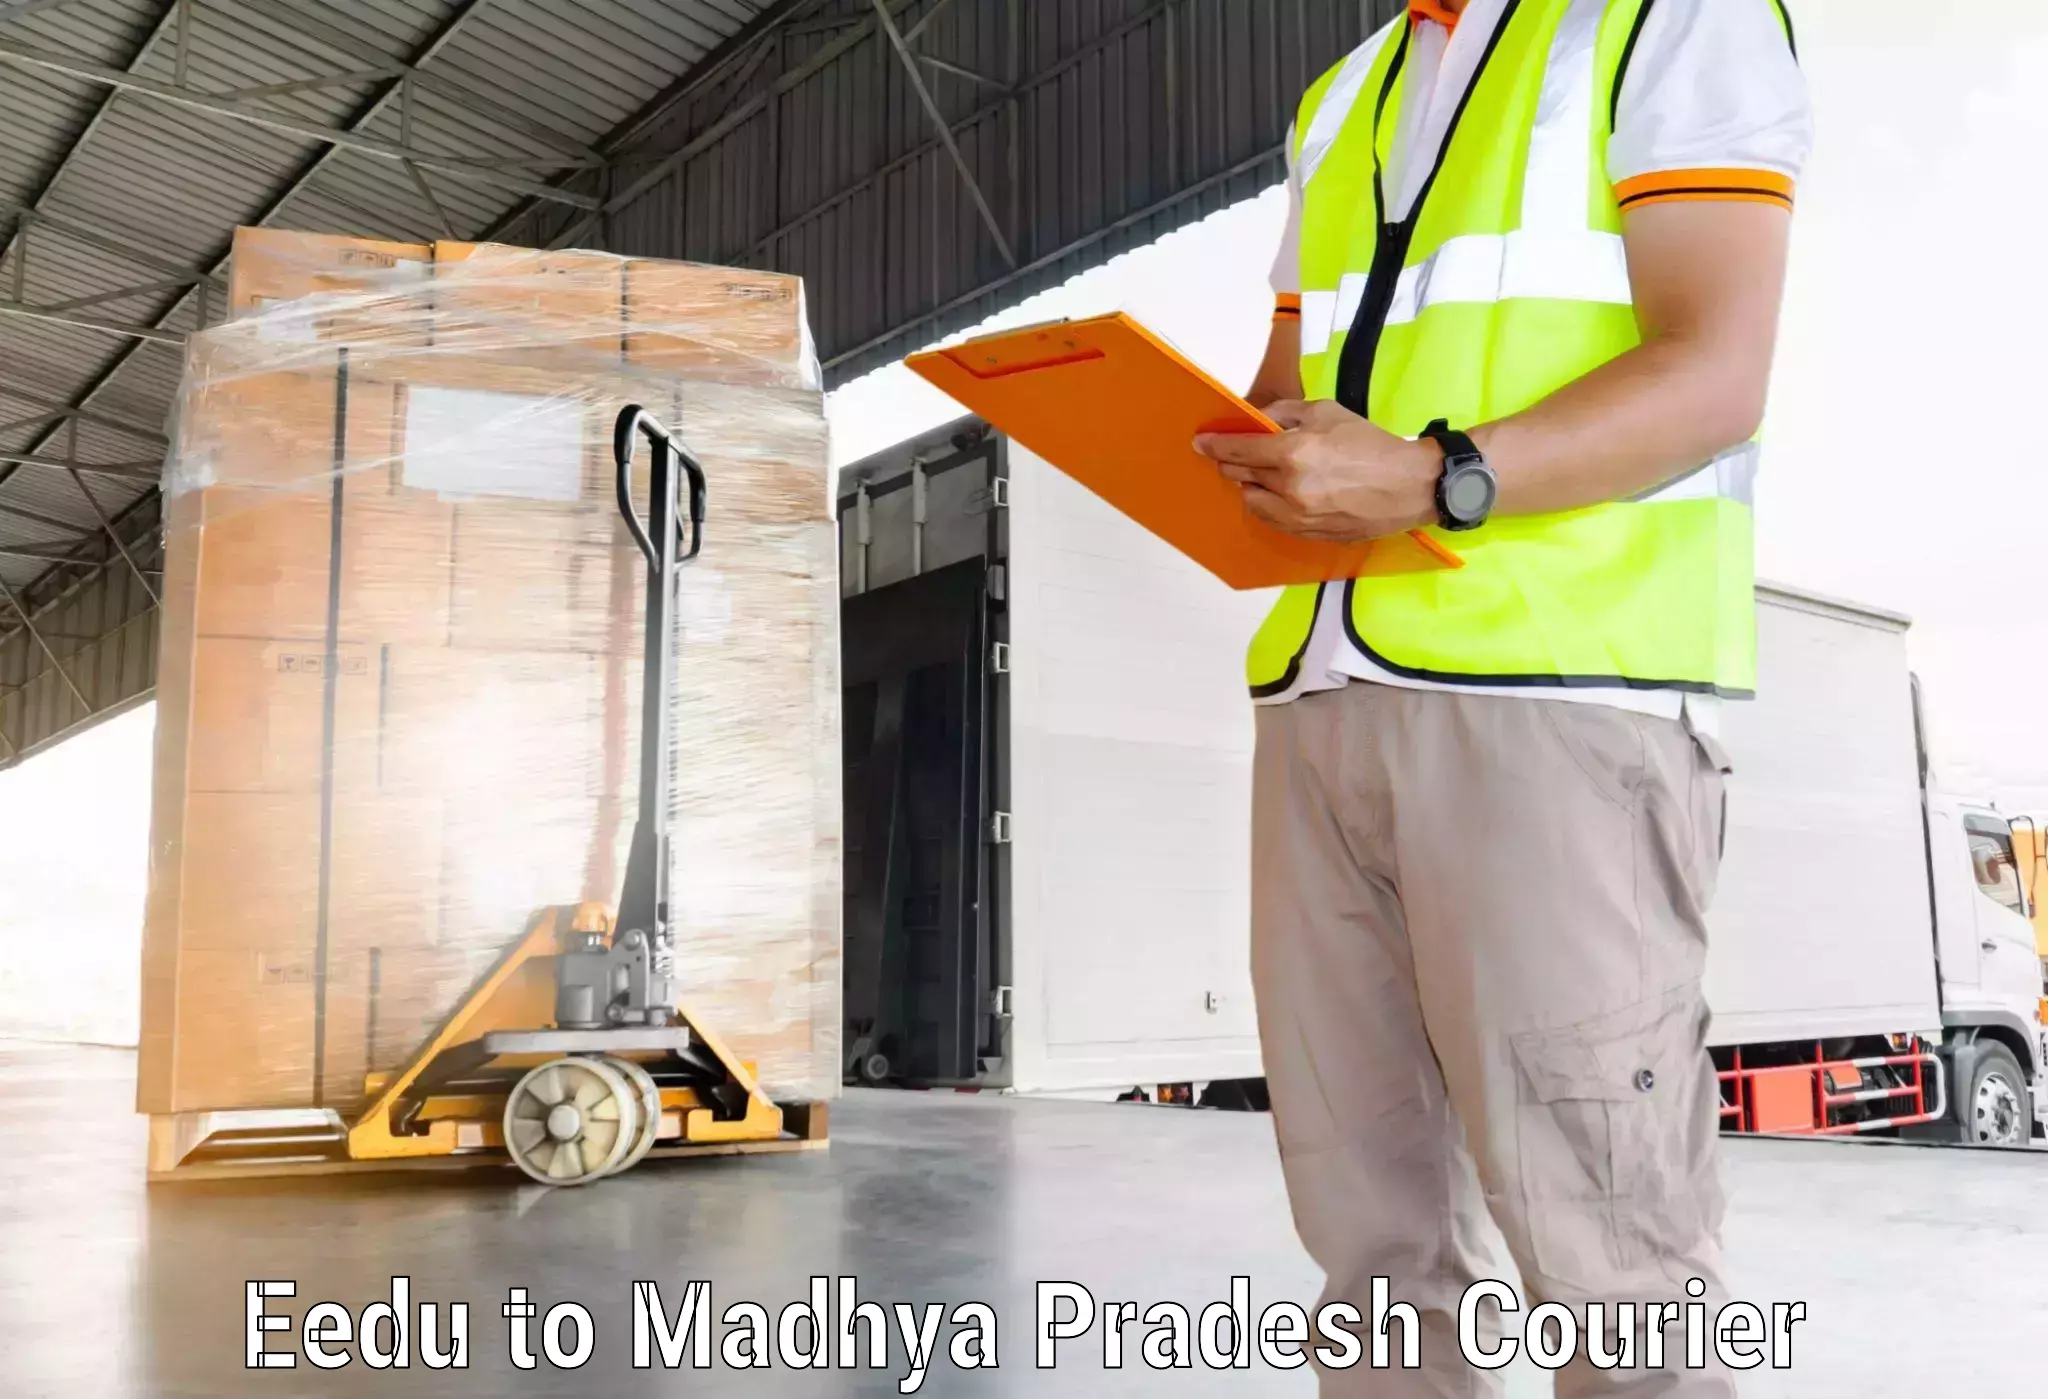 Courier service efficiency Eedu to Rehli